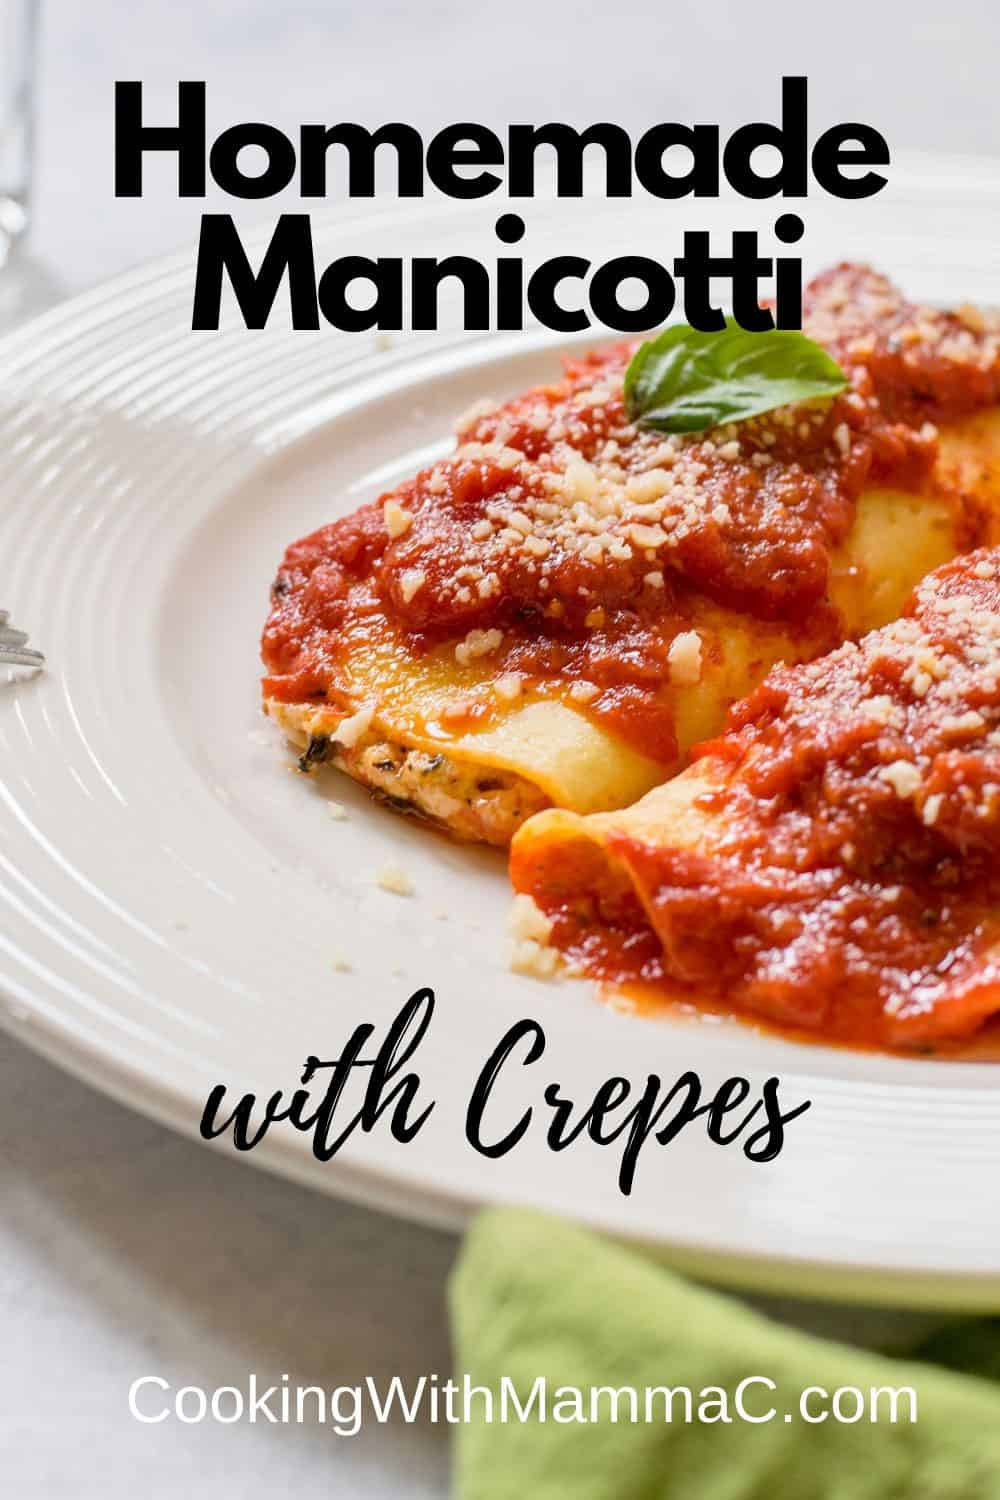 Homemade Manicotti with Crepes (Crespelle) - Cooking with Mamma C